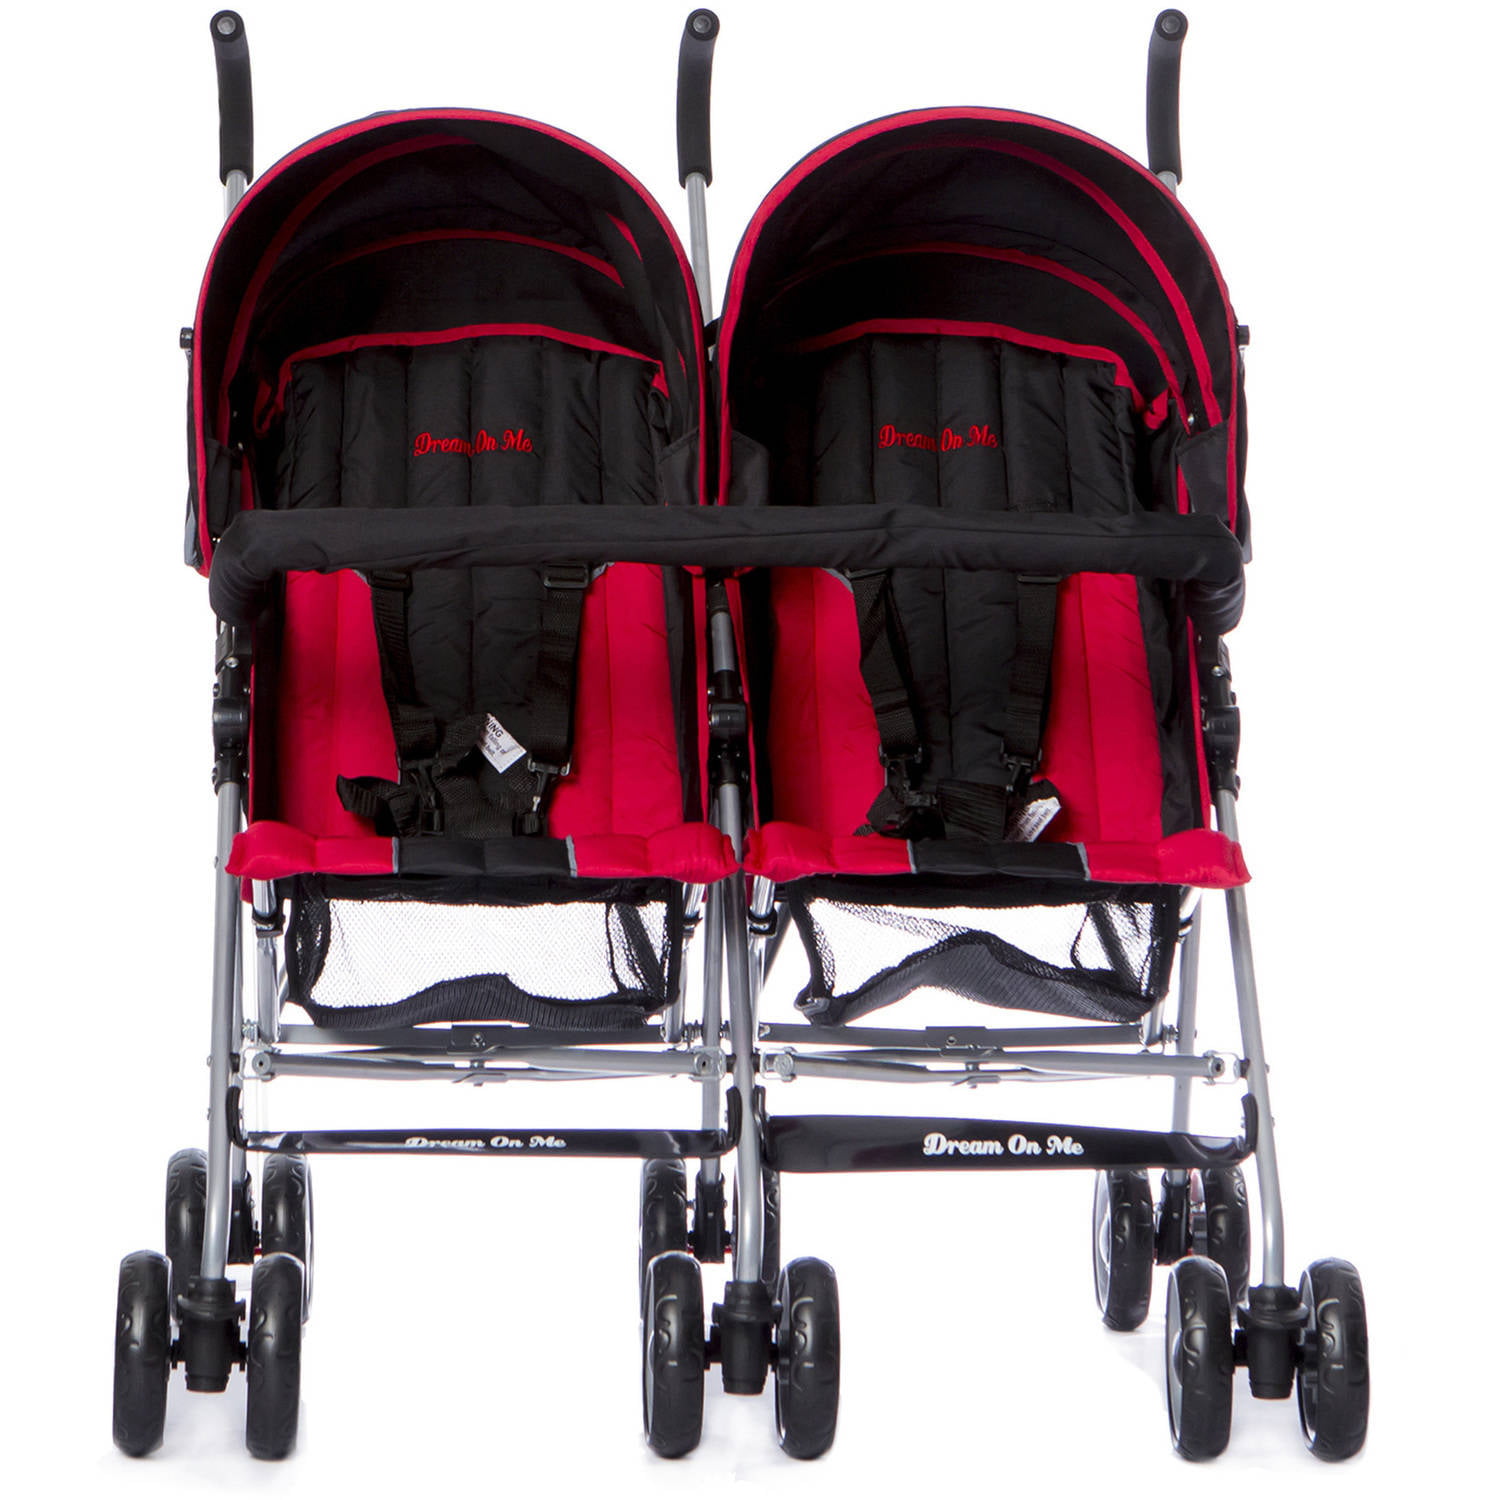 Dream On Me Double Twin Stroller, Pink 